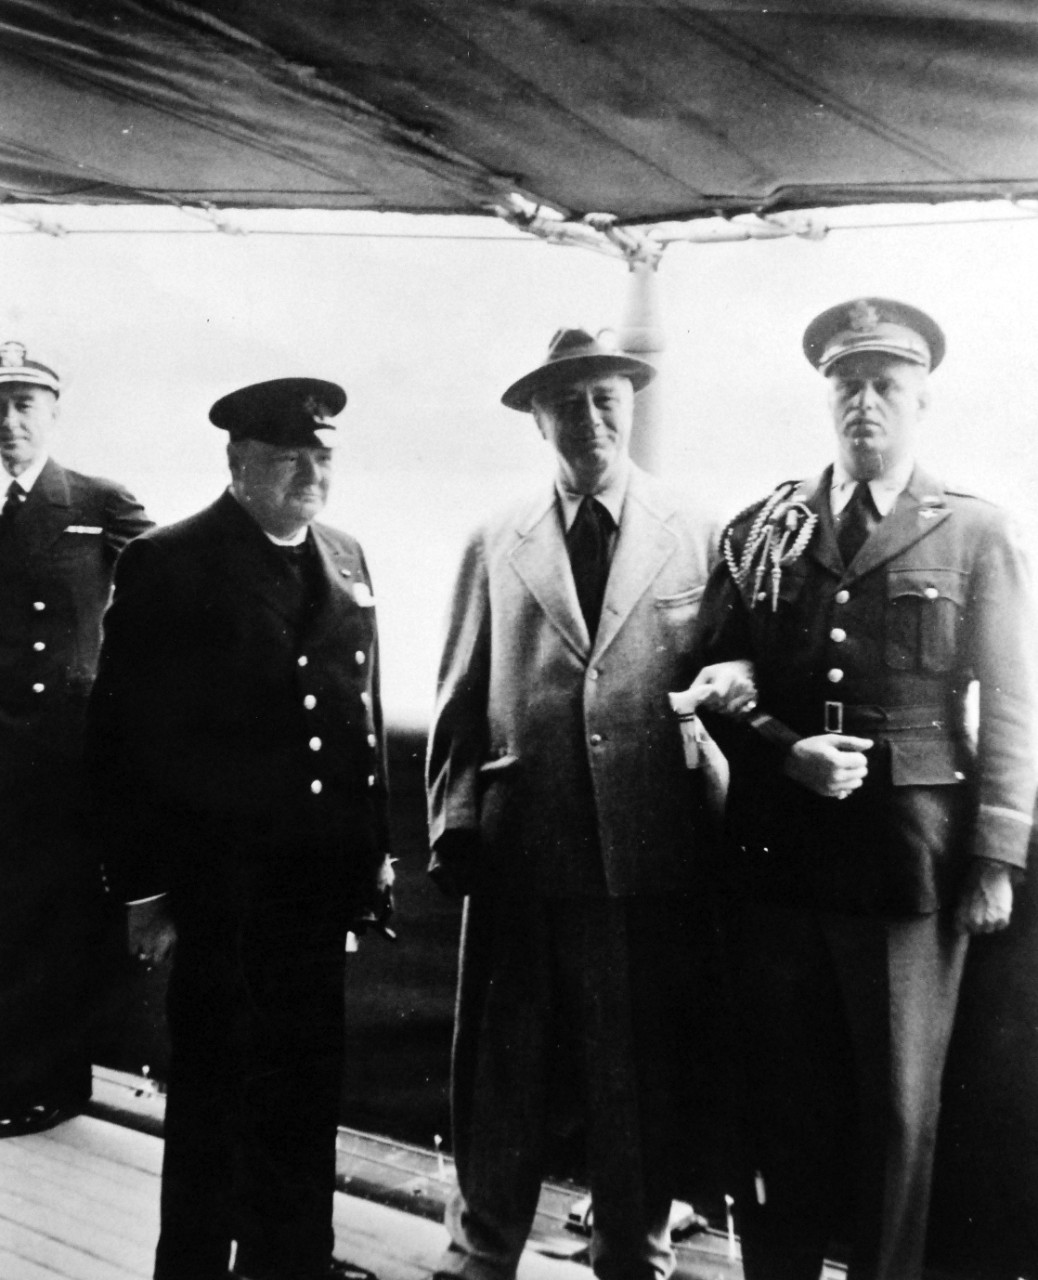 80-G-26853: Atlantic Charter, August 1941.  Prime Minister Winston S. Churchill and party coming onboard USS Augusta (CA-31) during the Atlantic Charter meeting.   Prime Minister Churchill and President Franklin D. Roosevelt are shown after the delivery of the message from His Majesty King George VI.    Photograph released August 10, 1941.   Official U.S. Navy Photograph, now in the collections of the National Archives.  (2016/03/22).